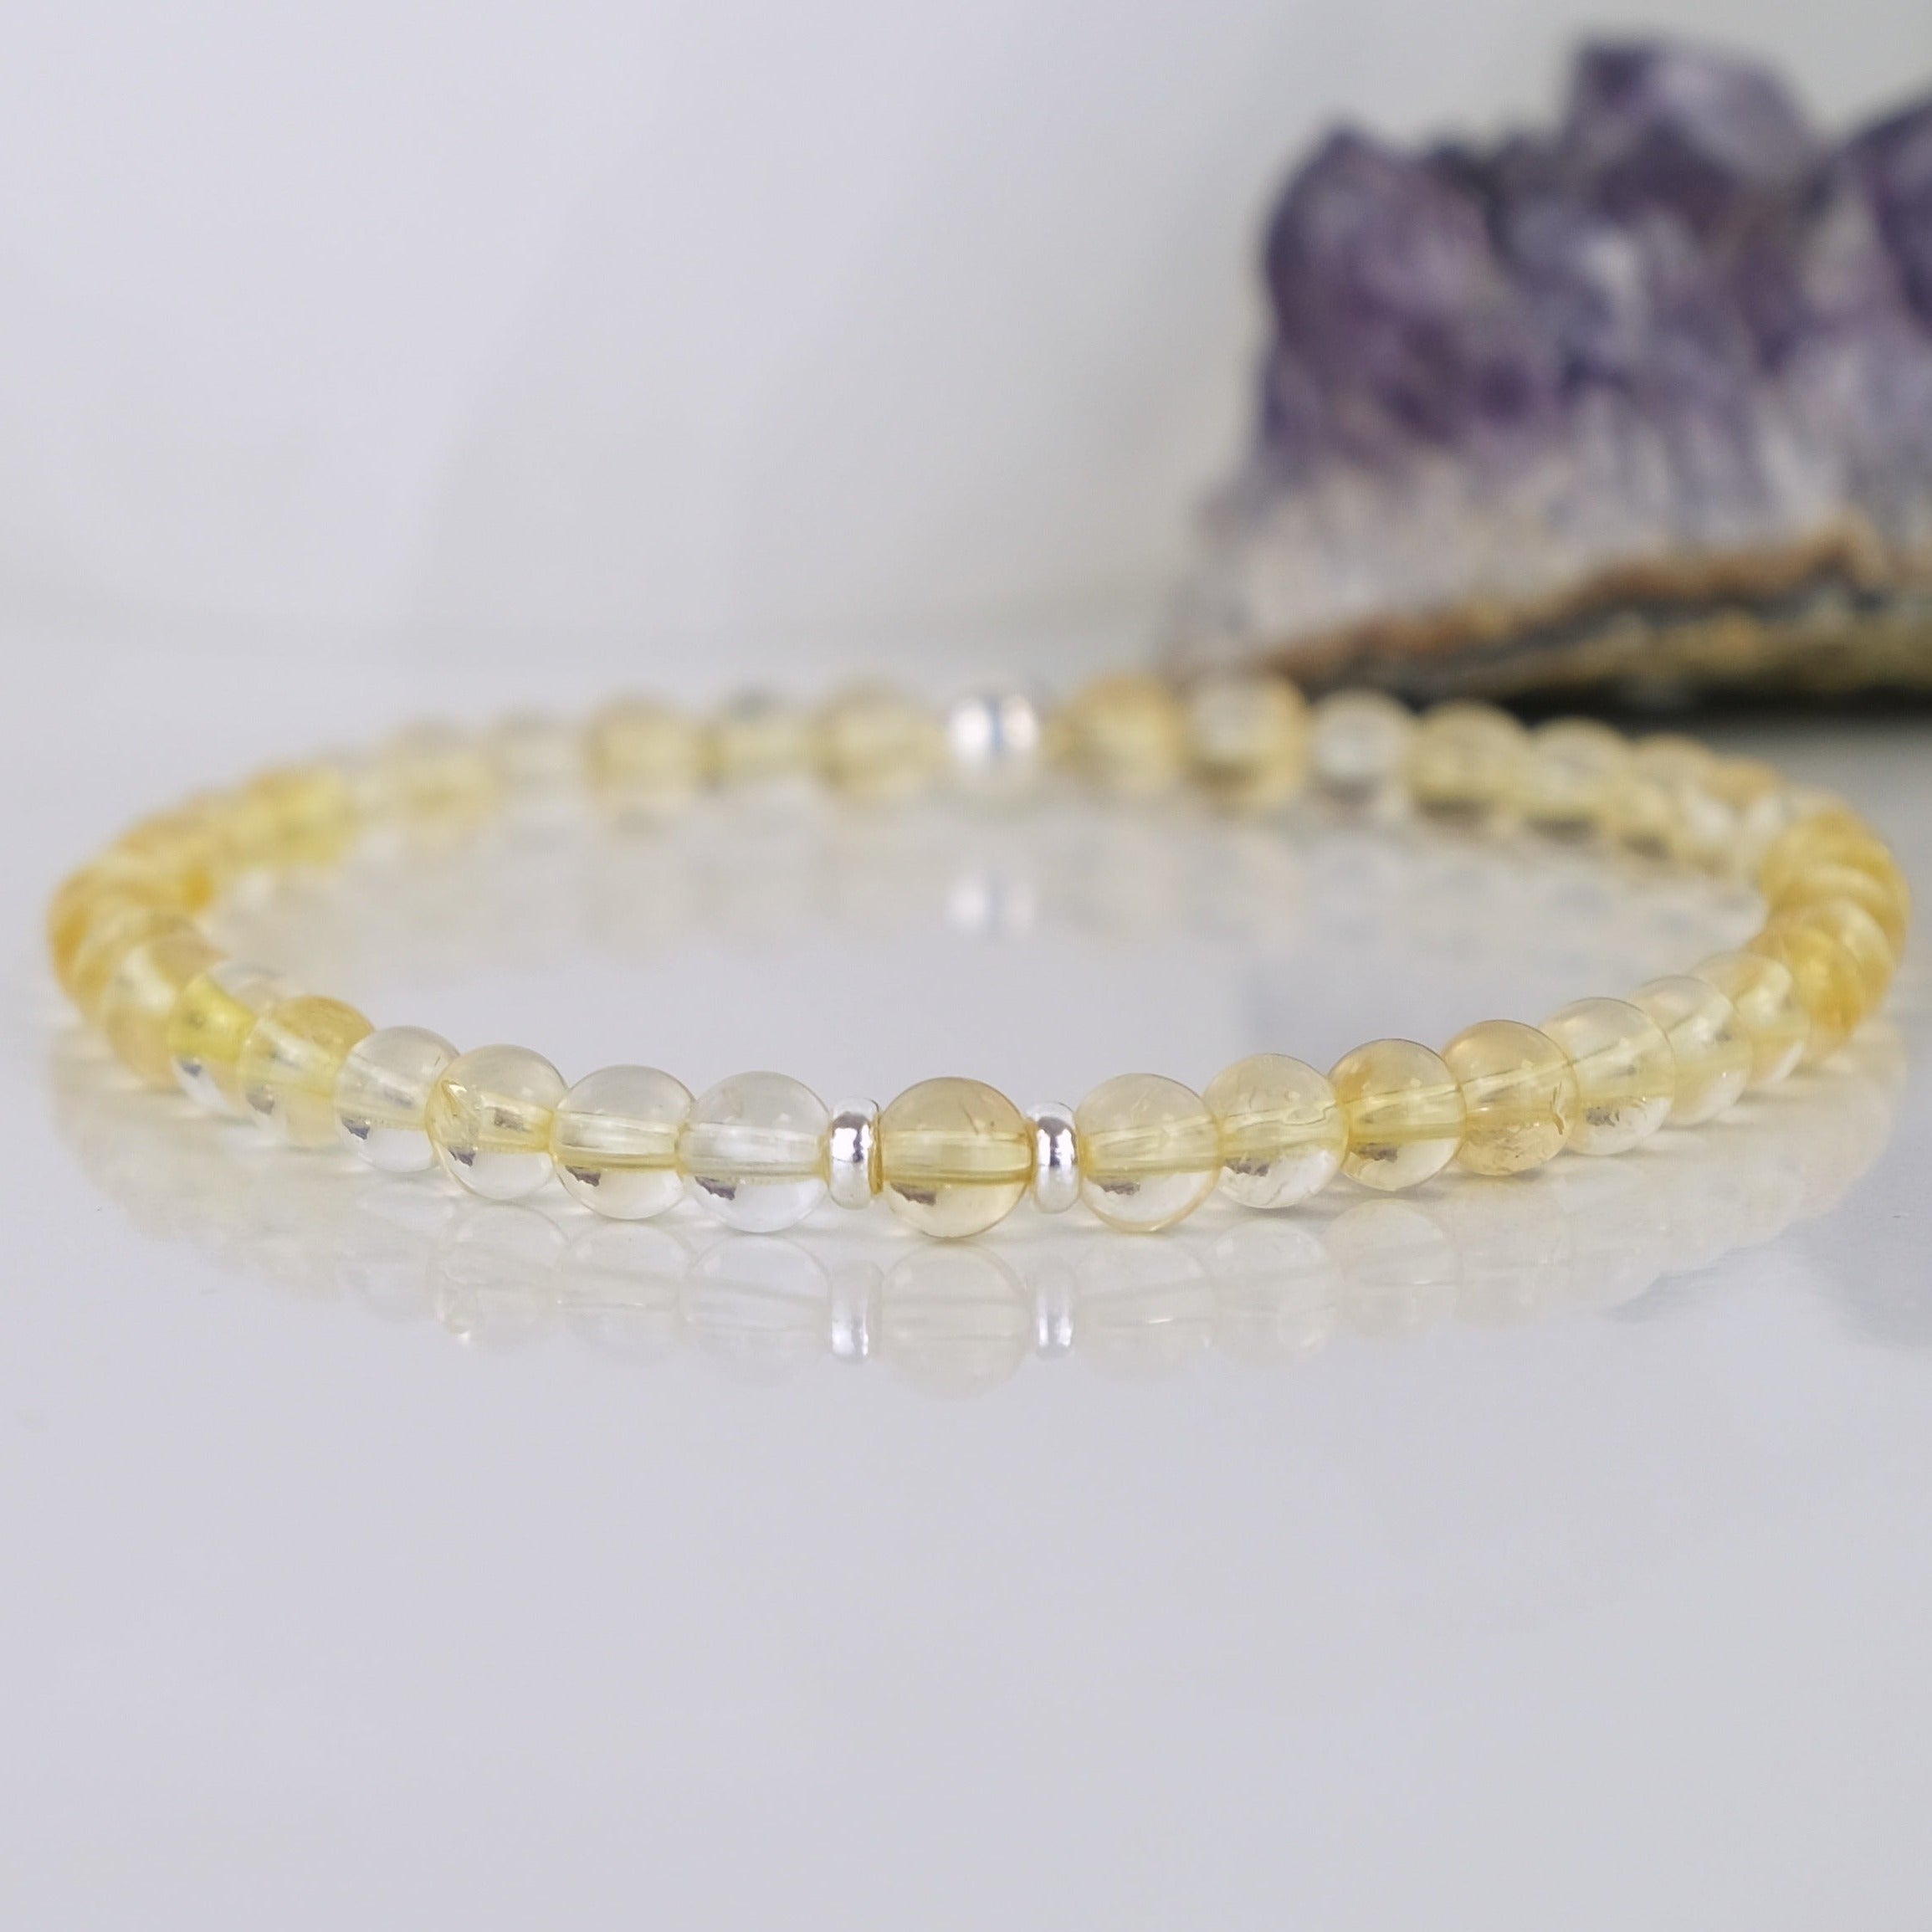 4mm Citrine energy gemstone bracelet with silver accessories